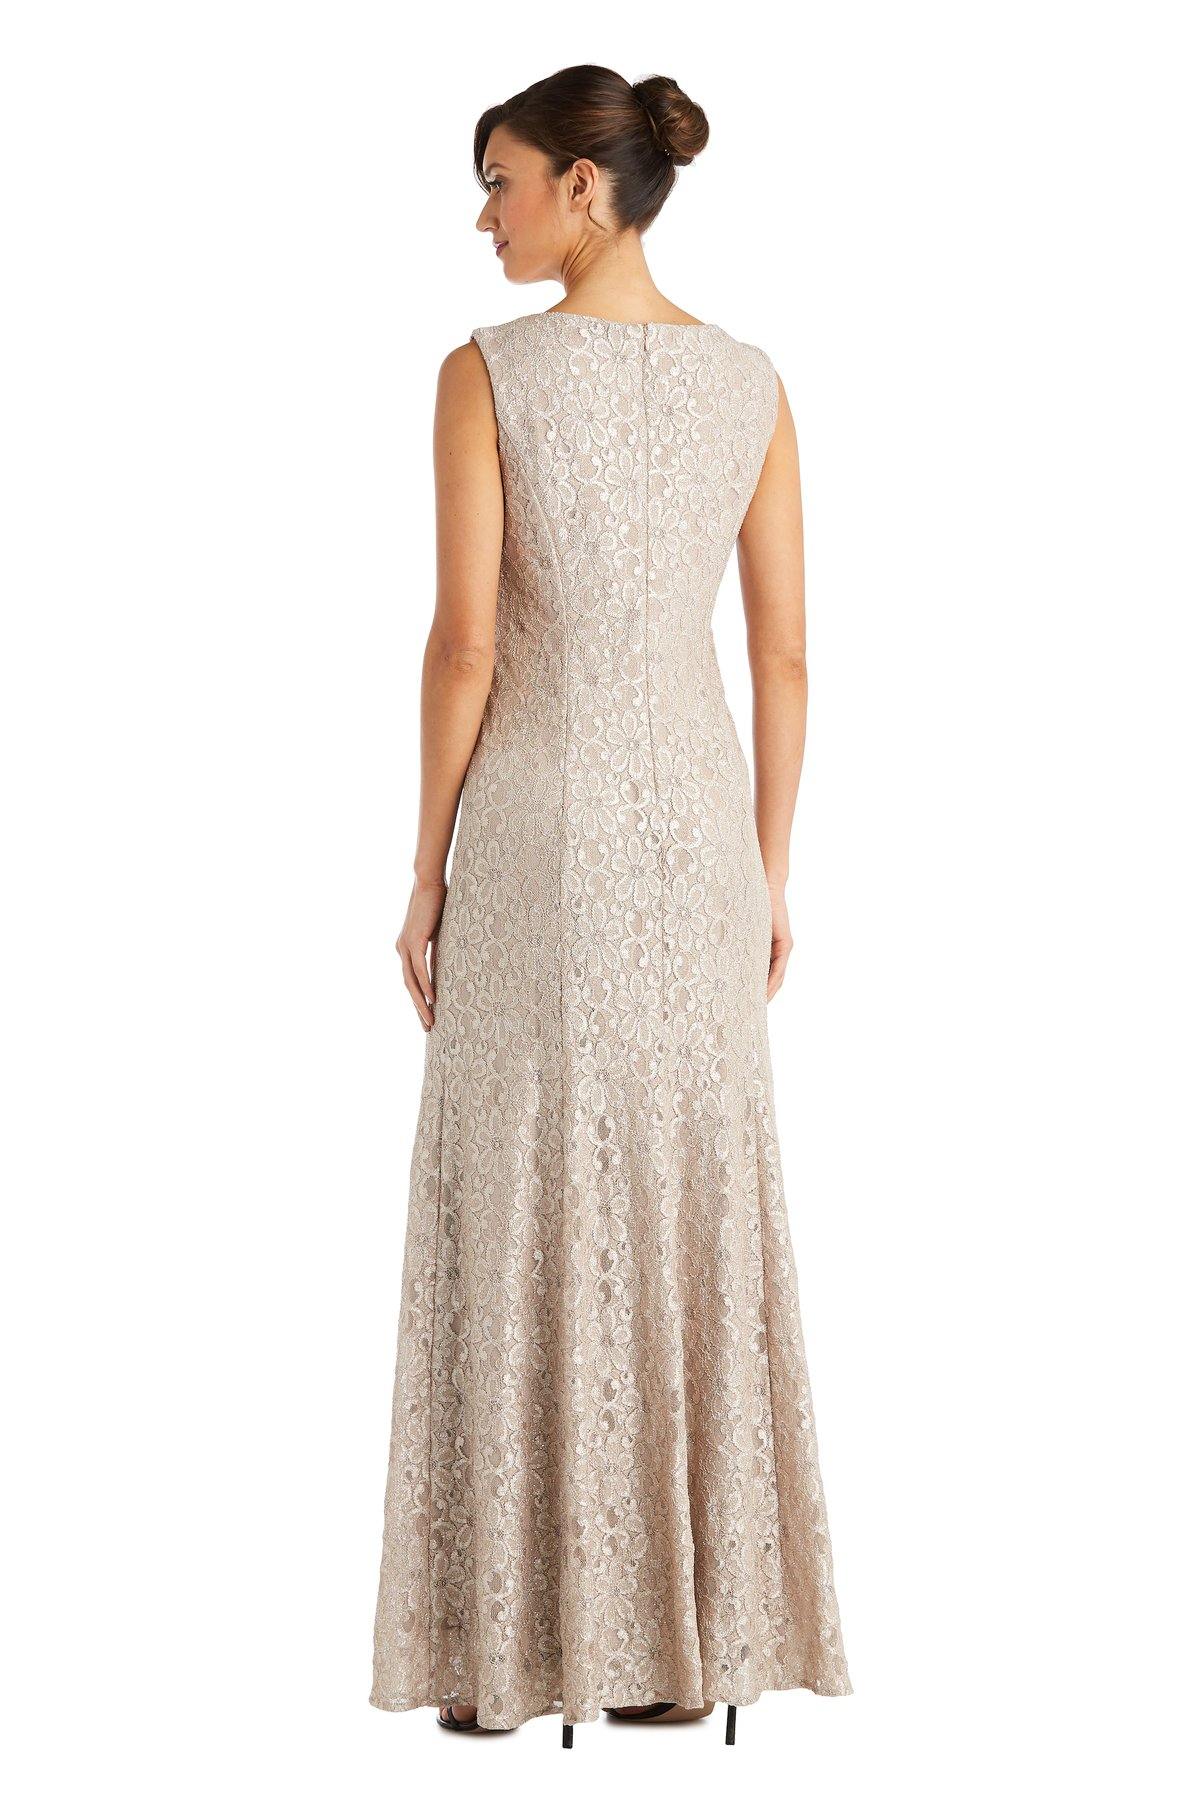 R&M Richards Mother of the Bride Long Dress 2382 - The Dress Outlet